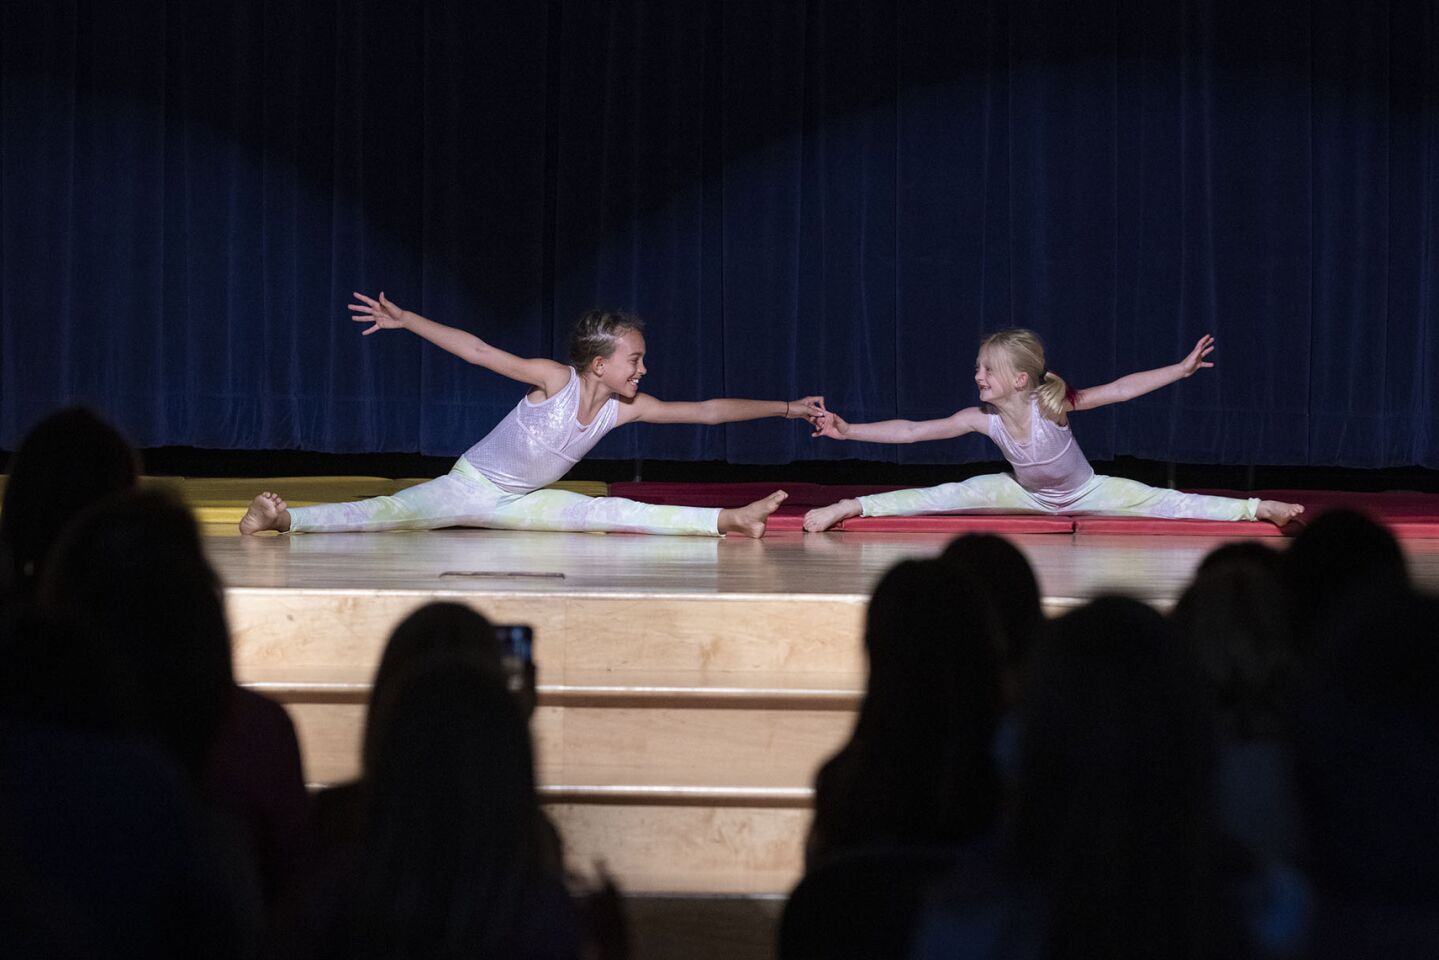 Zoe Bruner and Shay Seaman performed a gymnastic routine to "Party in the USA"